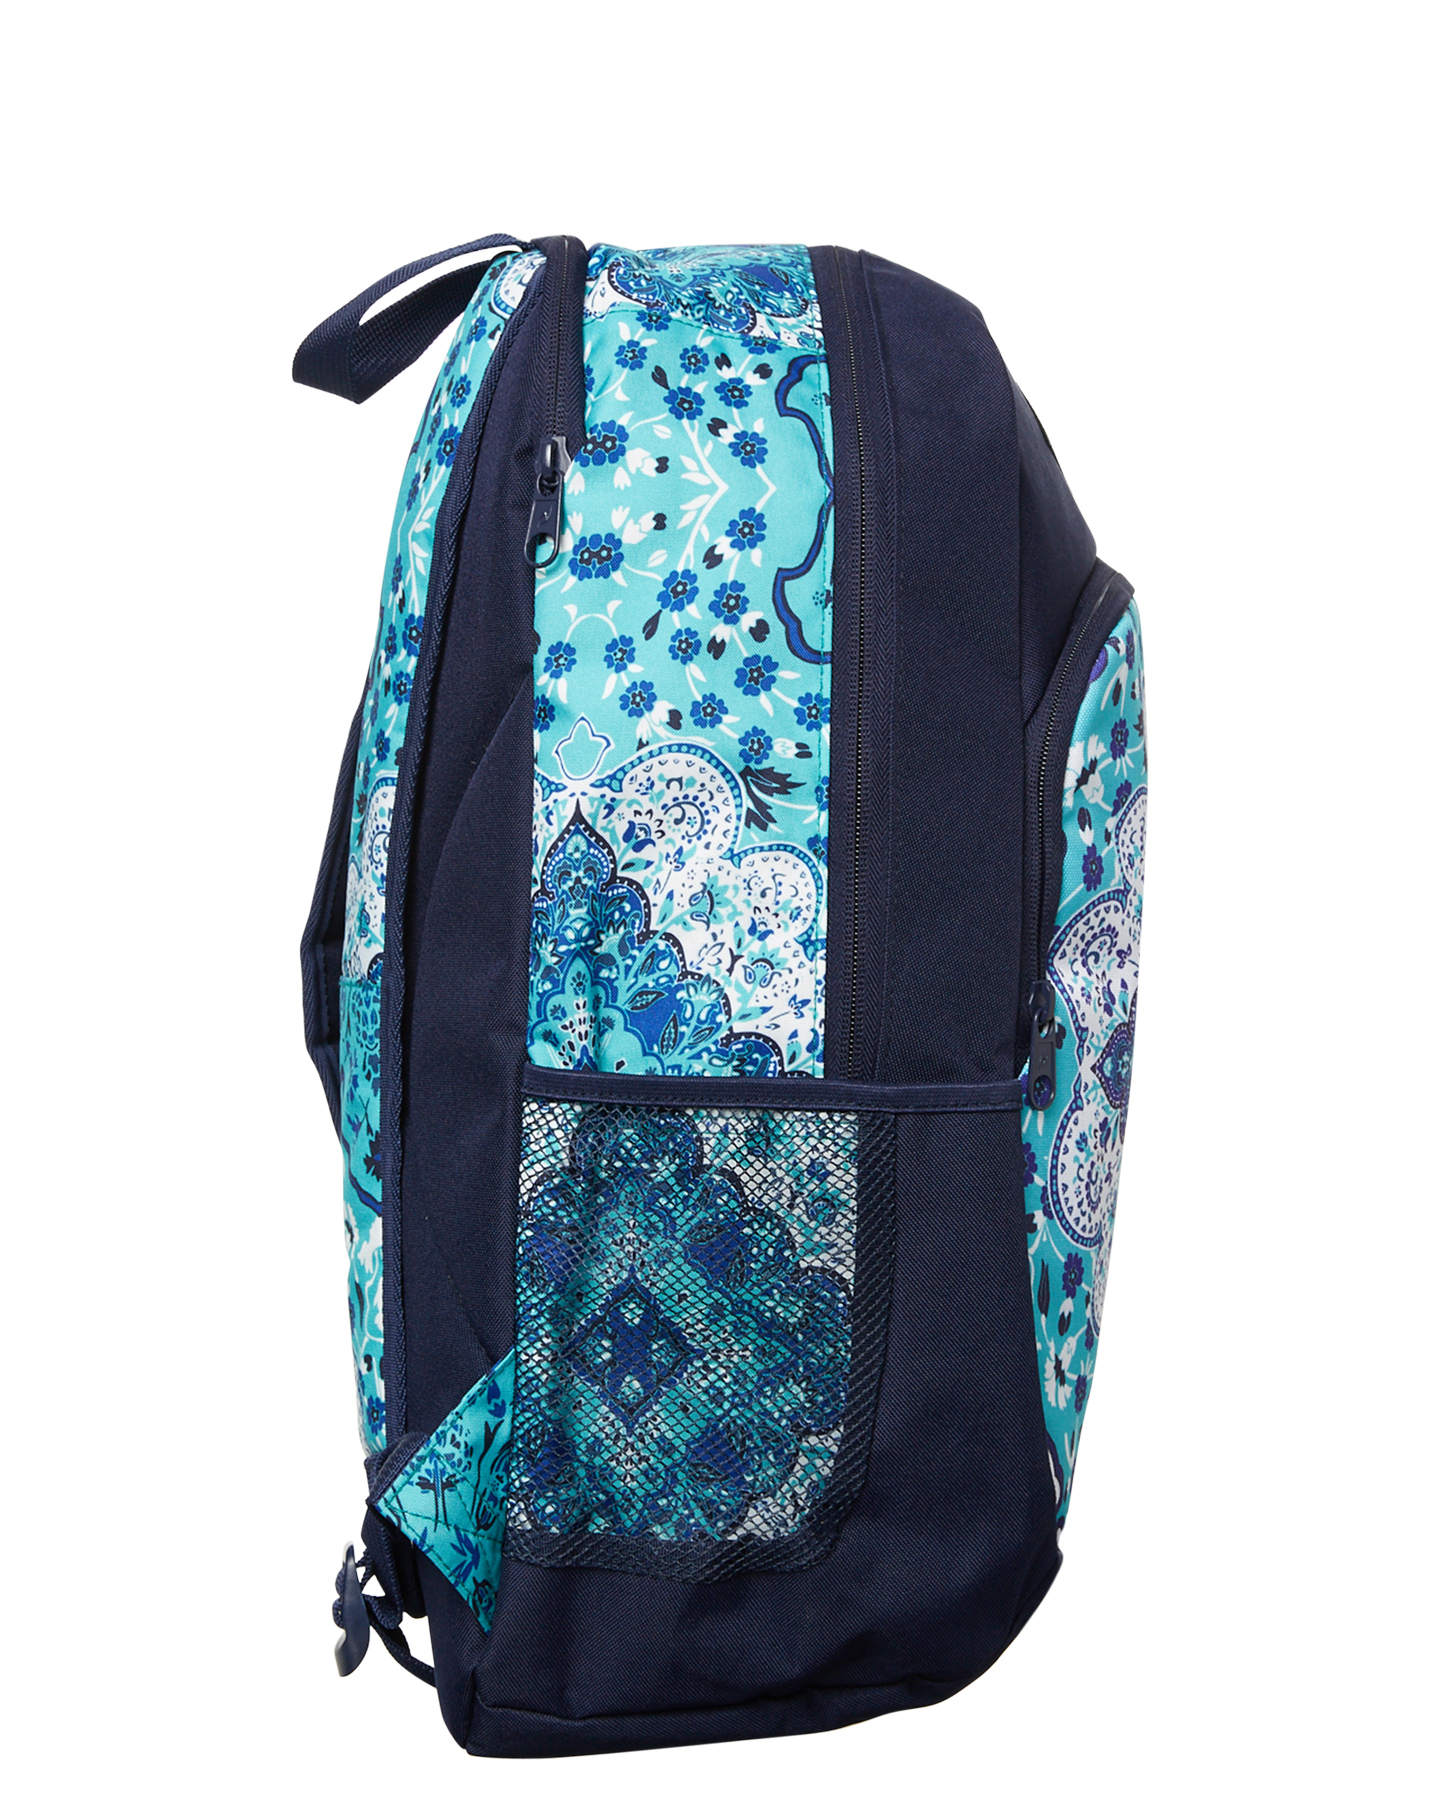 Rip Curl Ozone Mixed Up Backpack - Mint | SurfStitch